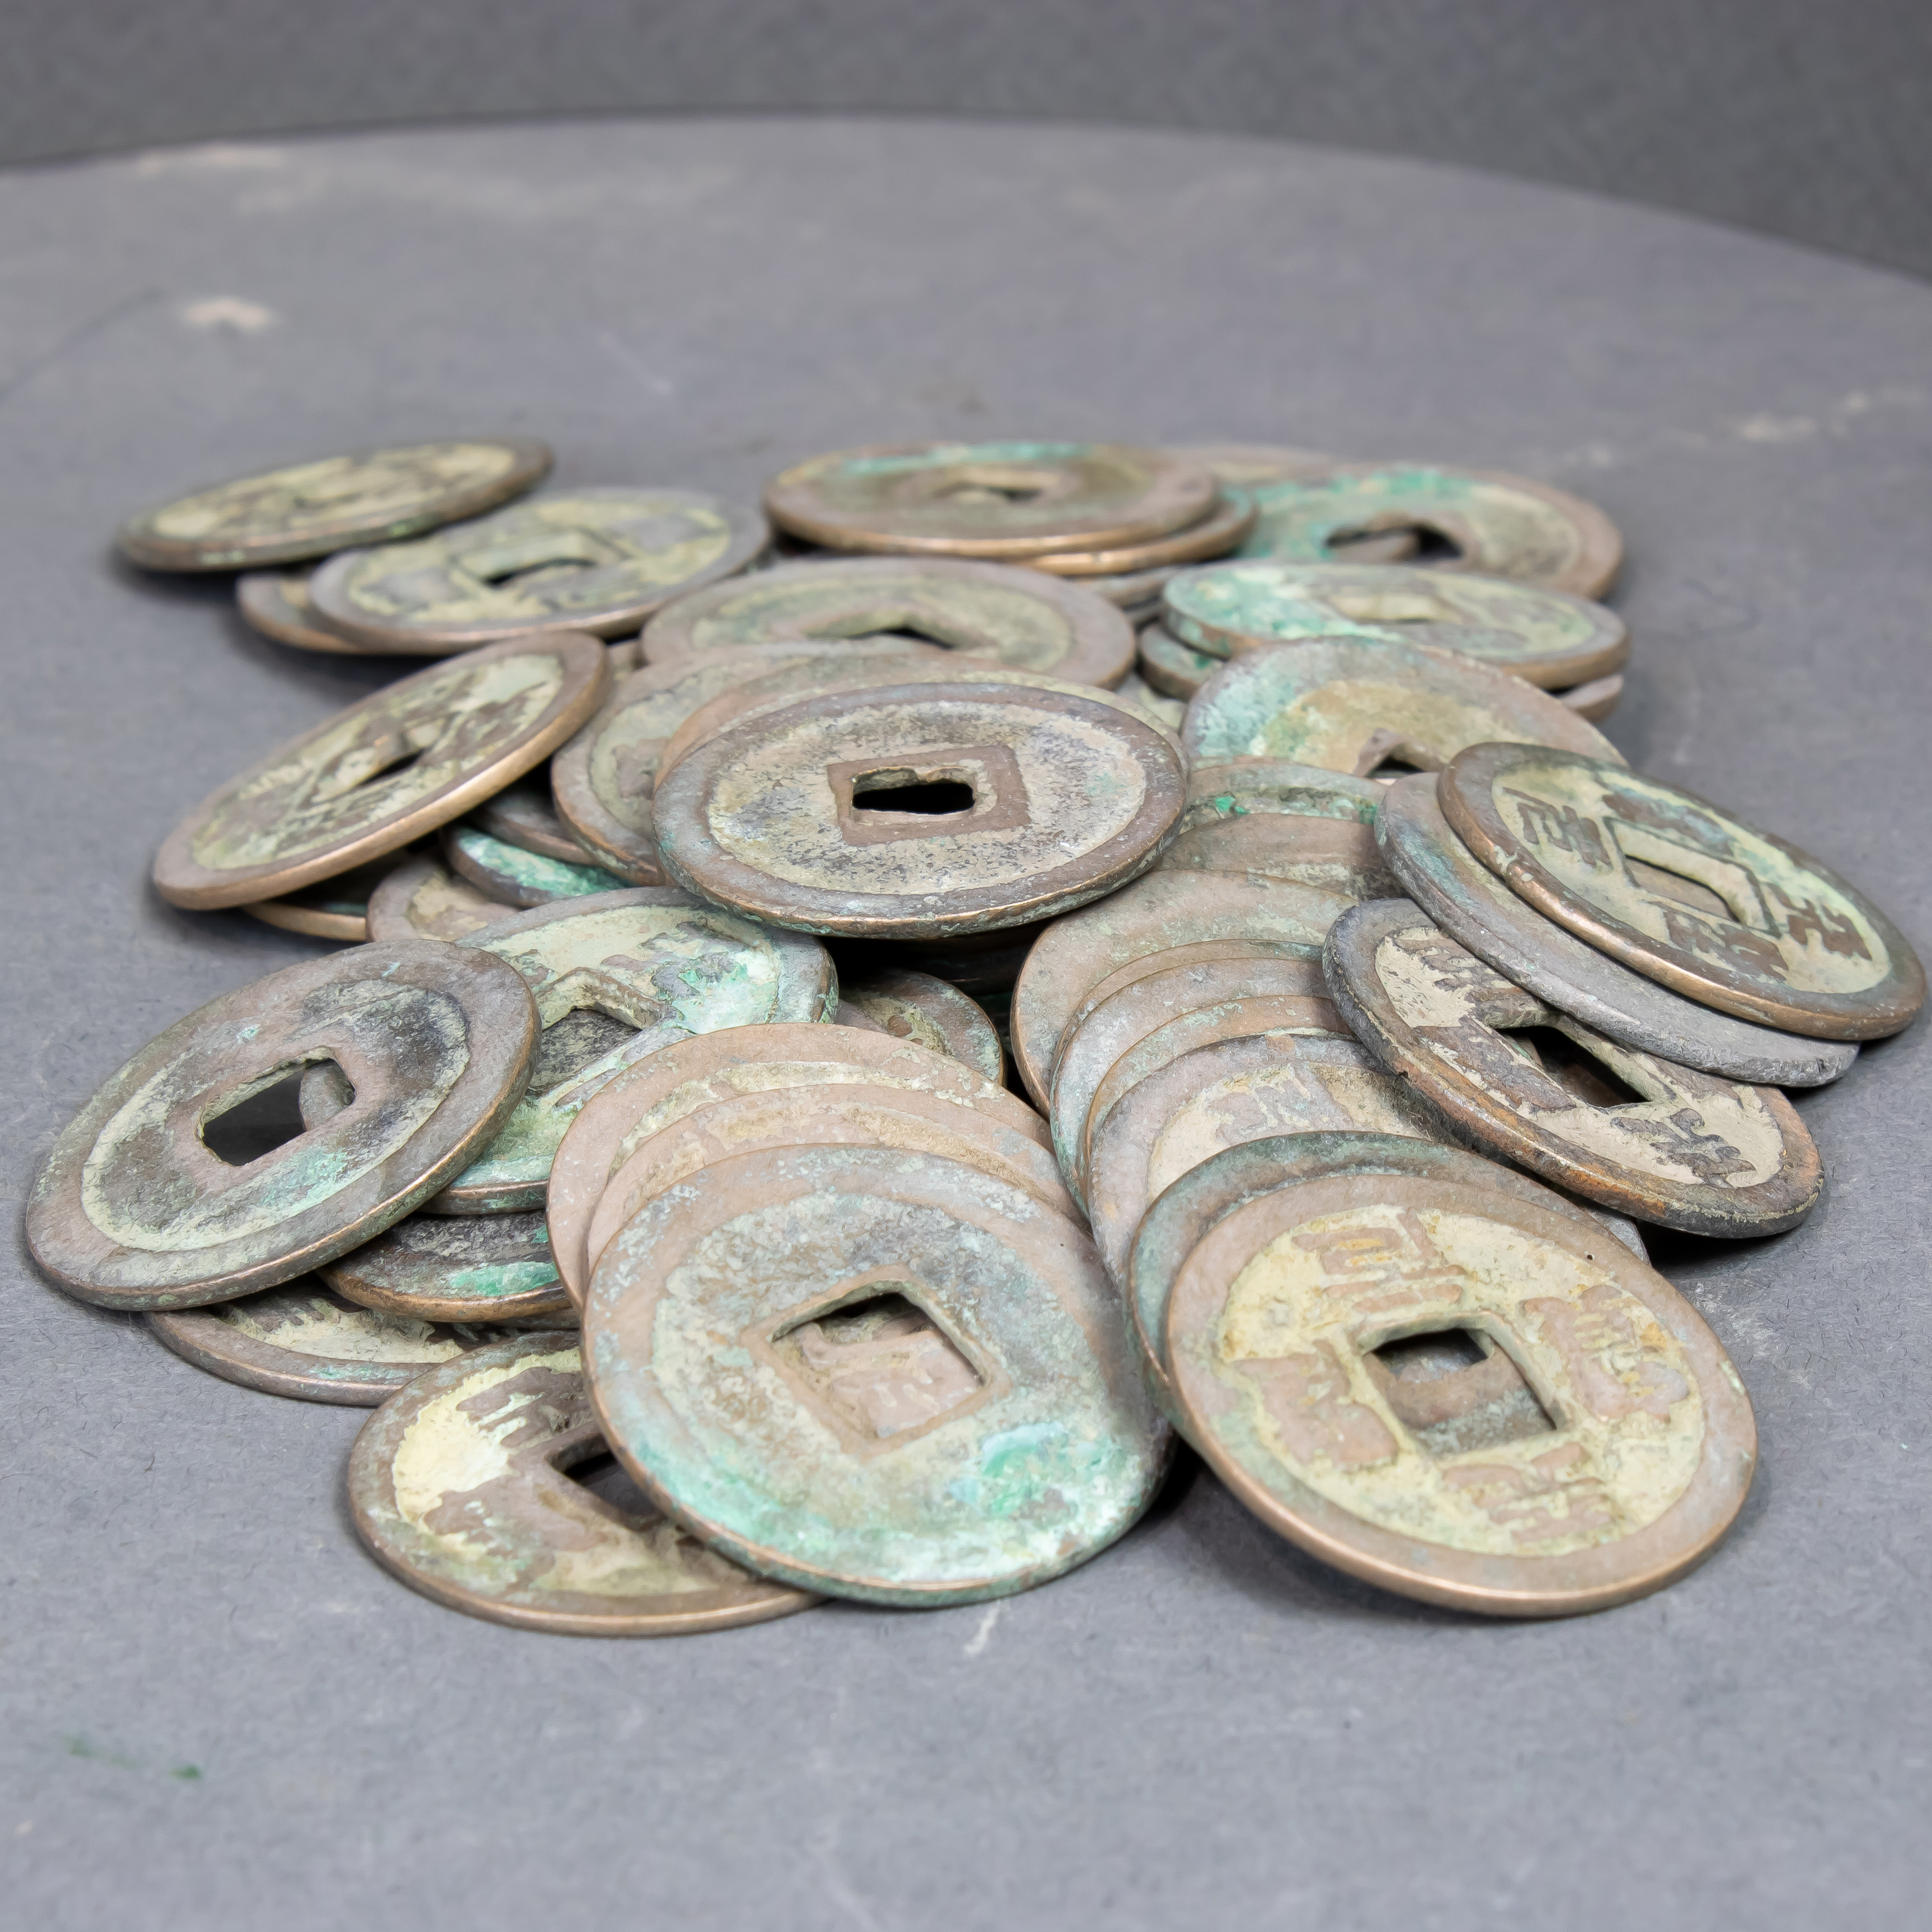 GROUP OF CHINESE BRONZE COINS Group 3a4512